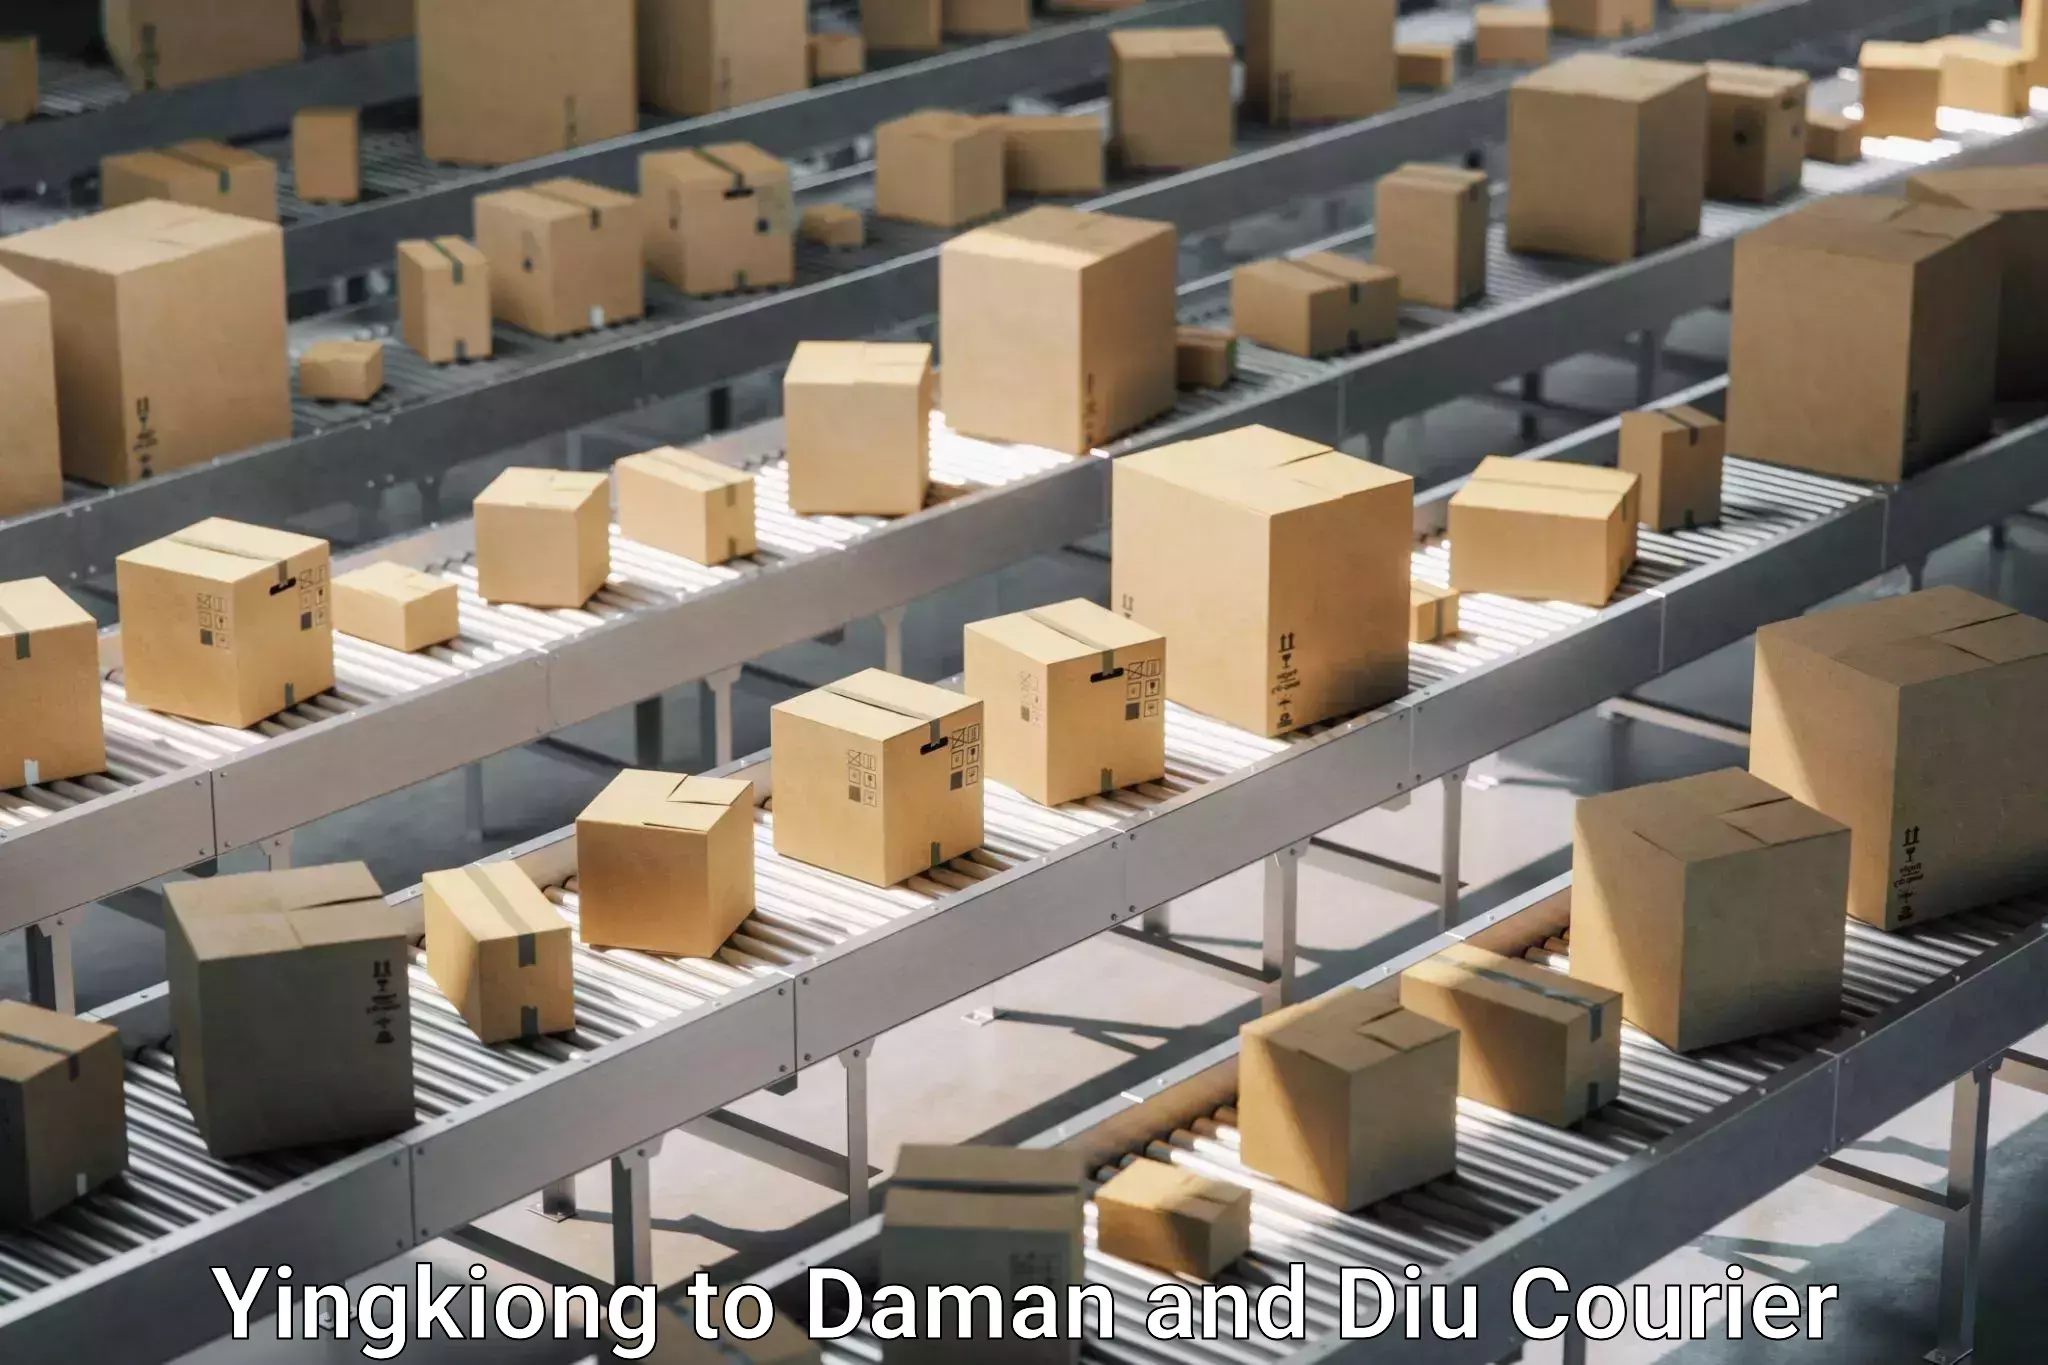 Trusted relocation experts Yingkiong to Daman